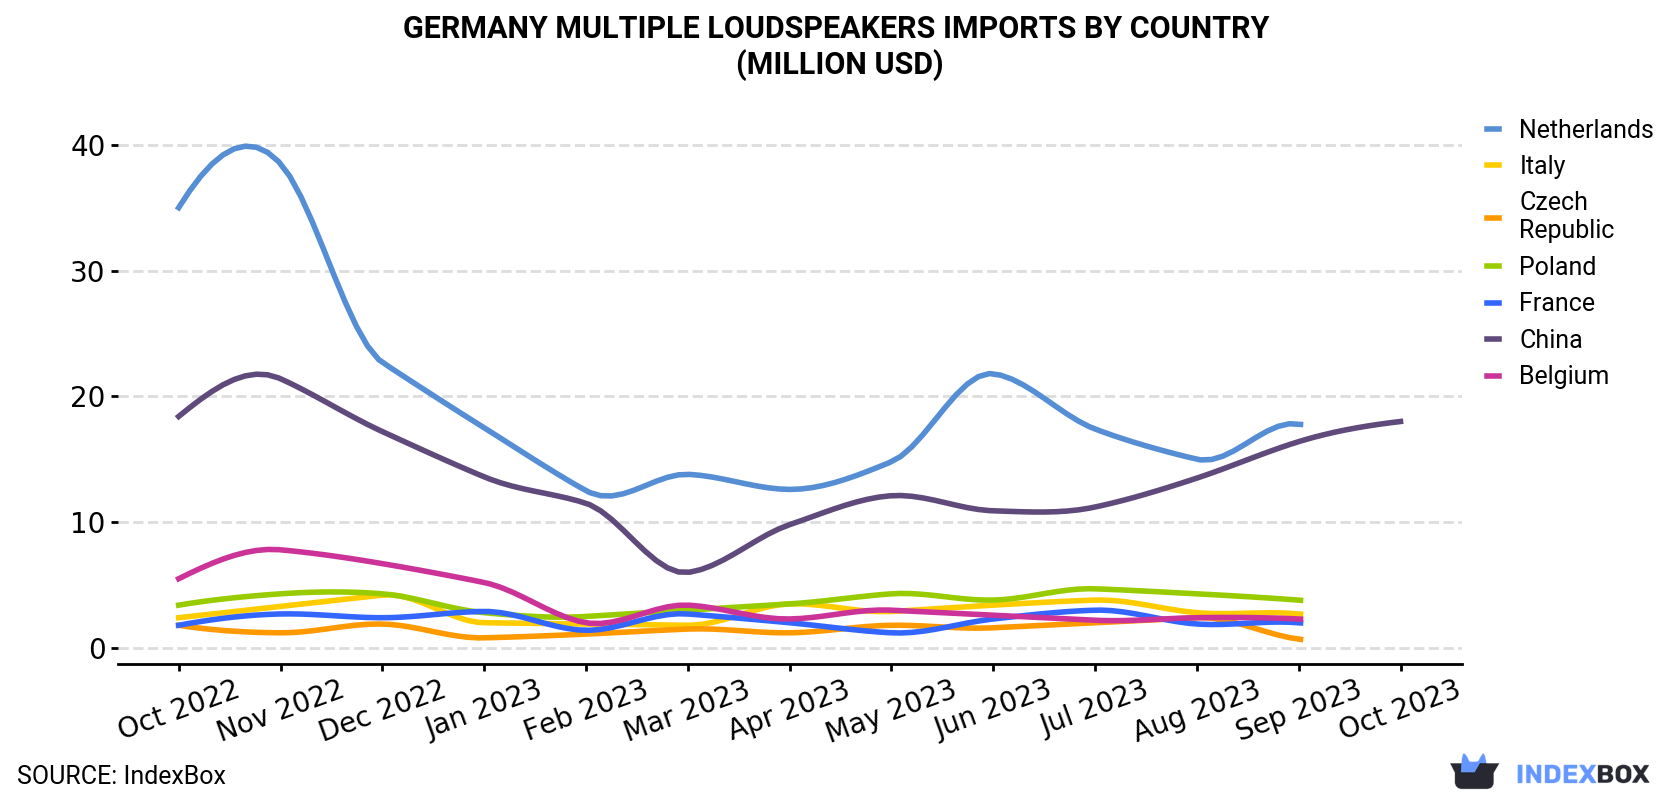 Germany Multiple Loudspeakers Imports By Country (Million USD)